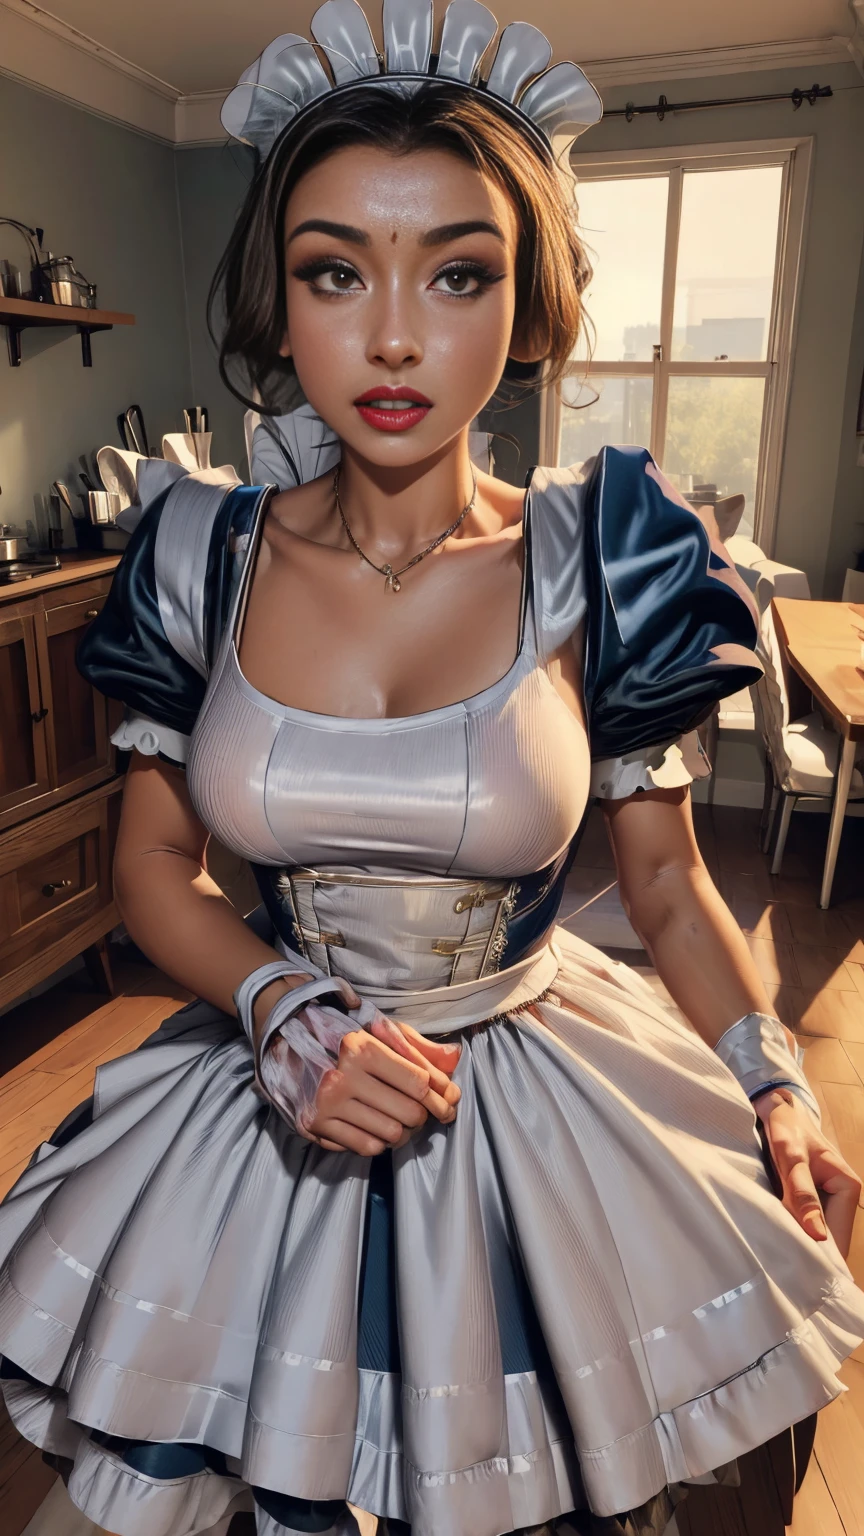 ((beautiful detailed maid (in maid clothes:1.4), 50s style:1.5)), elegant mansion interior, hyper detailed, 8k, high quality, ultra realistic, realistic lighting, photorealistic, cinematic, highly detailed face and eyes, beautiful detailed dress, intricate details, chiaroscuro lighting, dramatic shadows, warm color tones, golden hour lighting, ornate decor, luxurious furniture, parquet floors.